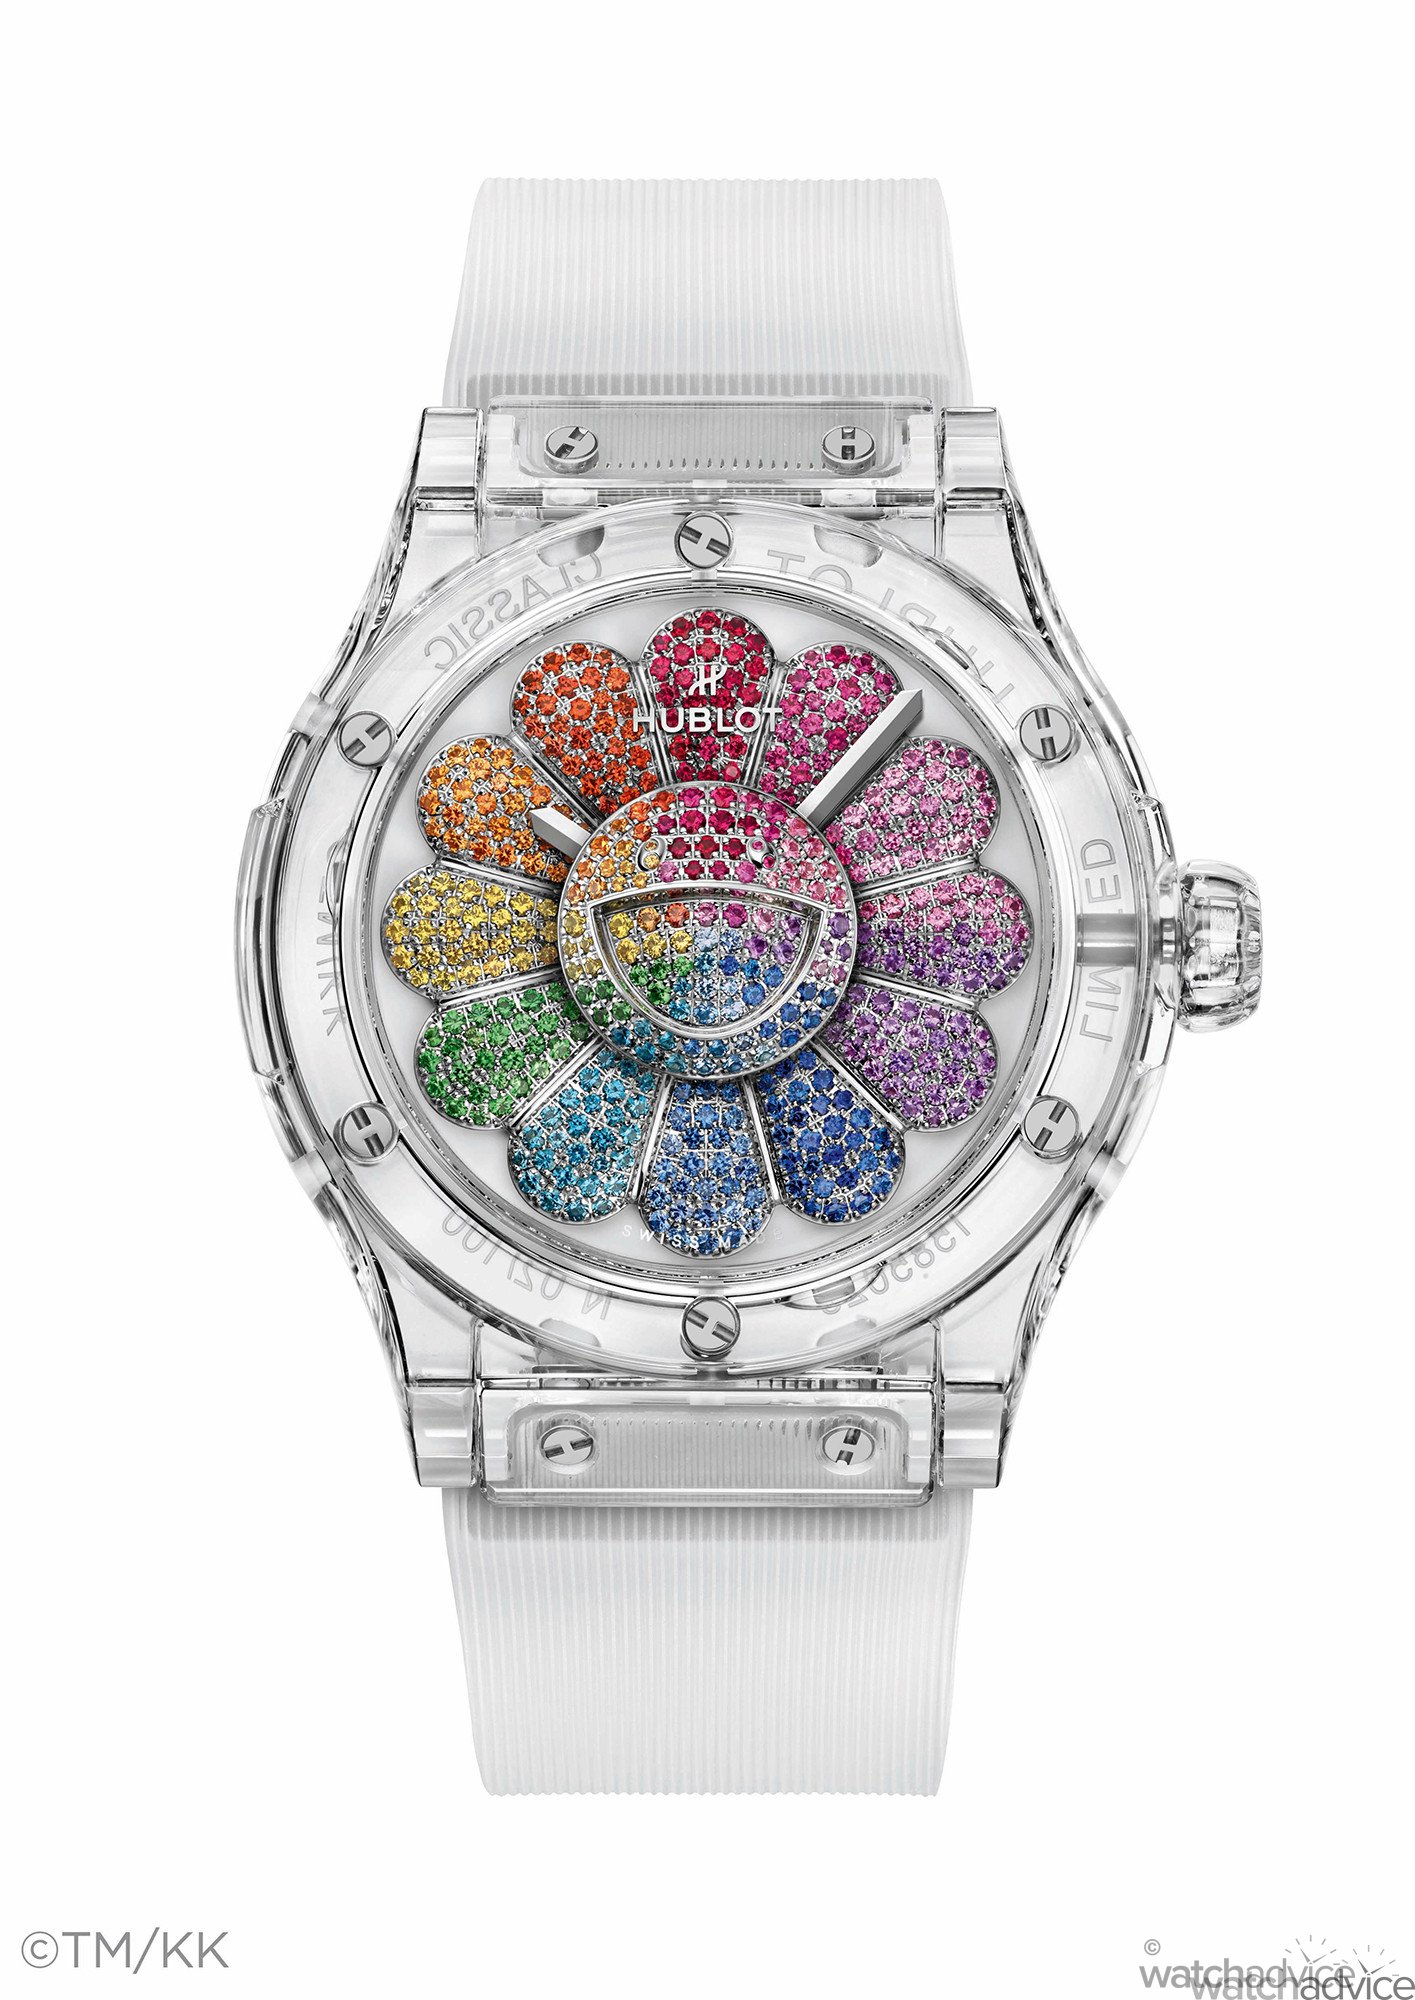 Takashi Murakami's iconic smiling flowers have been transformed into a  collectable timepiece